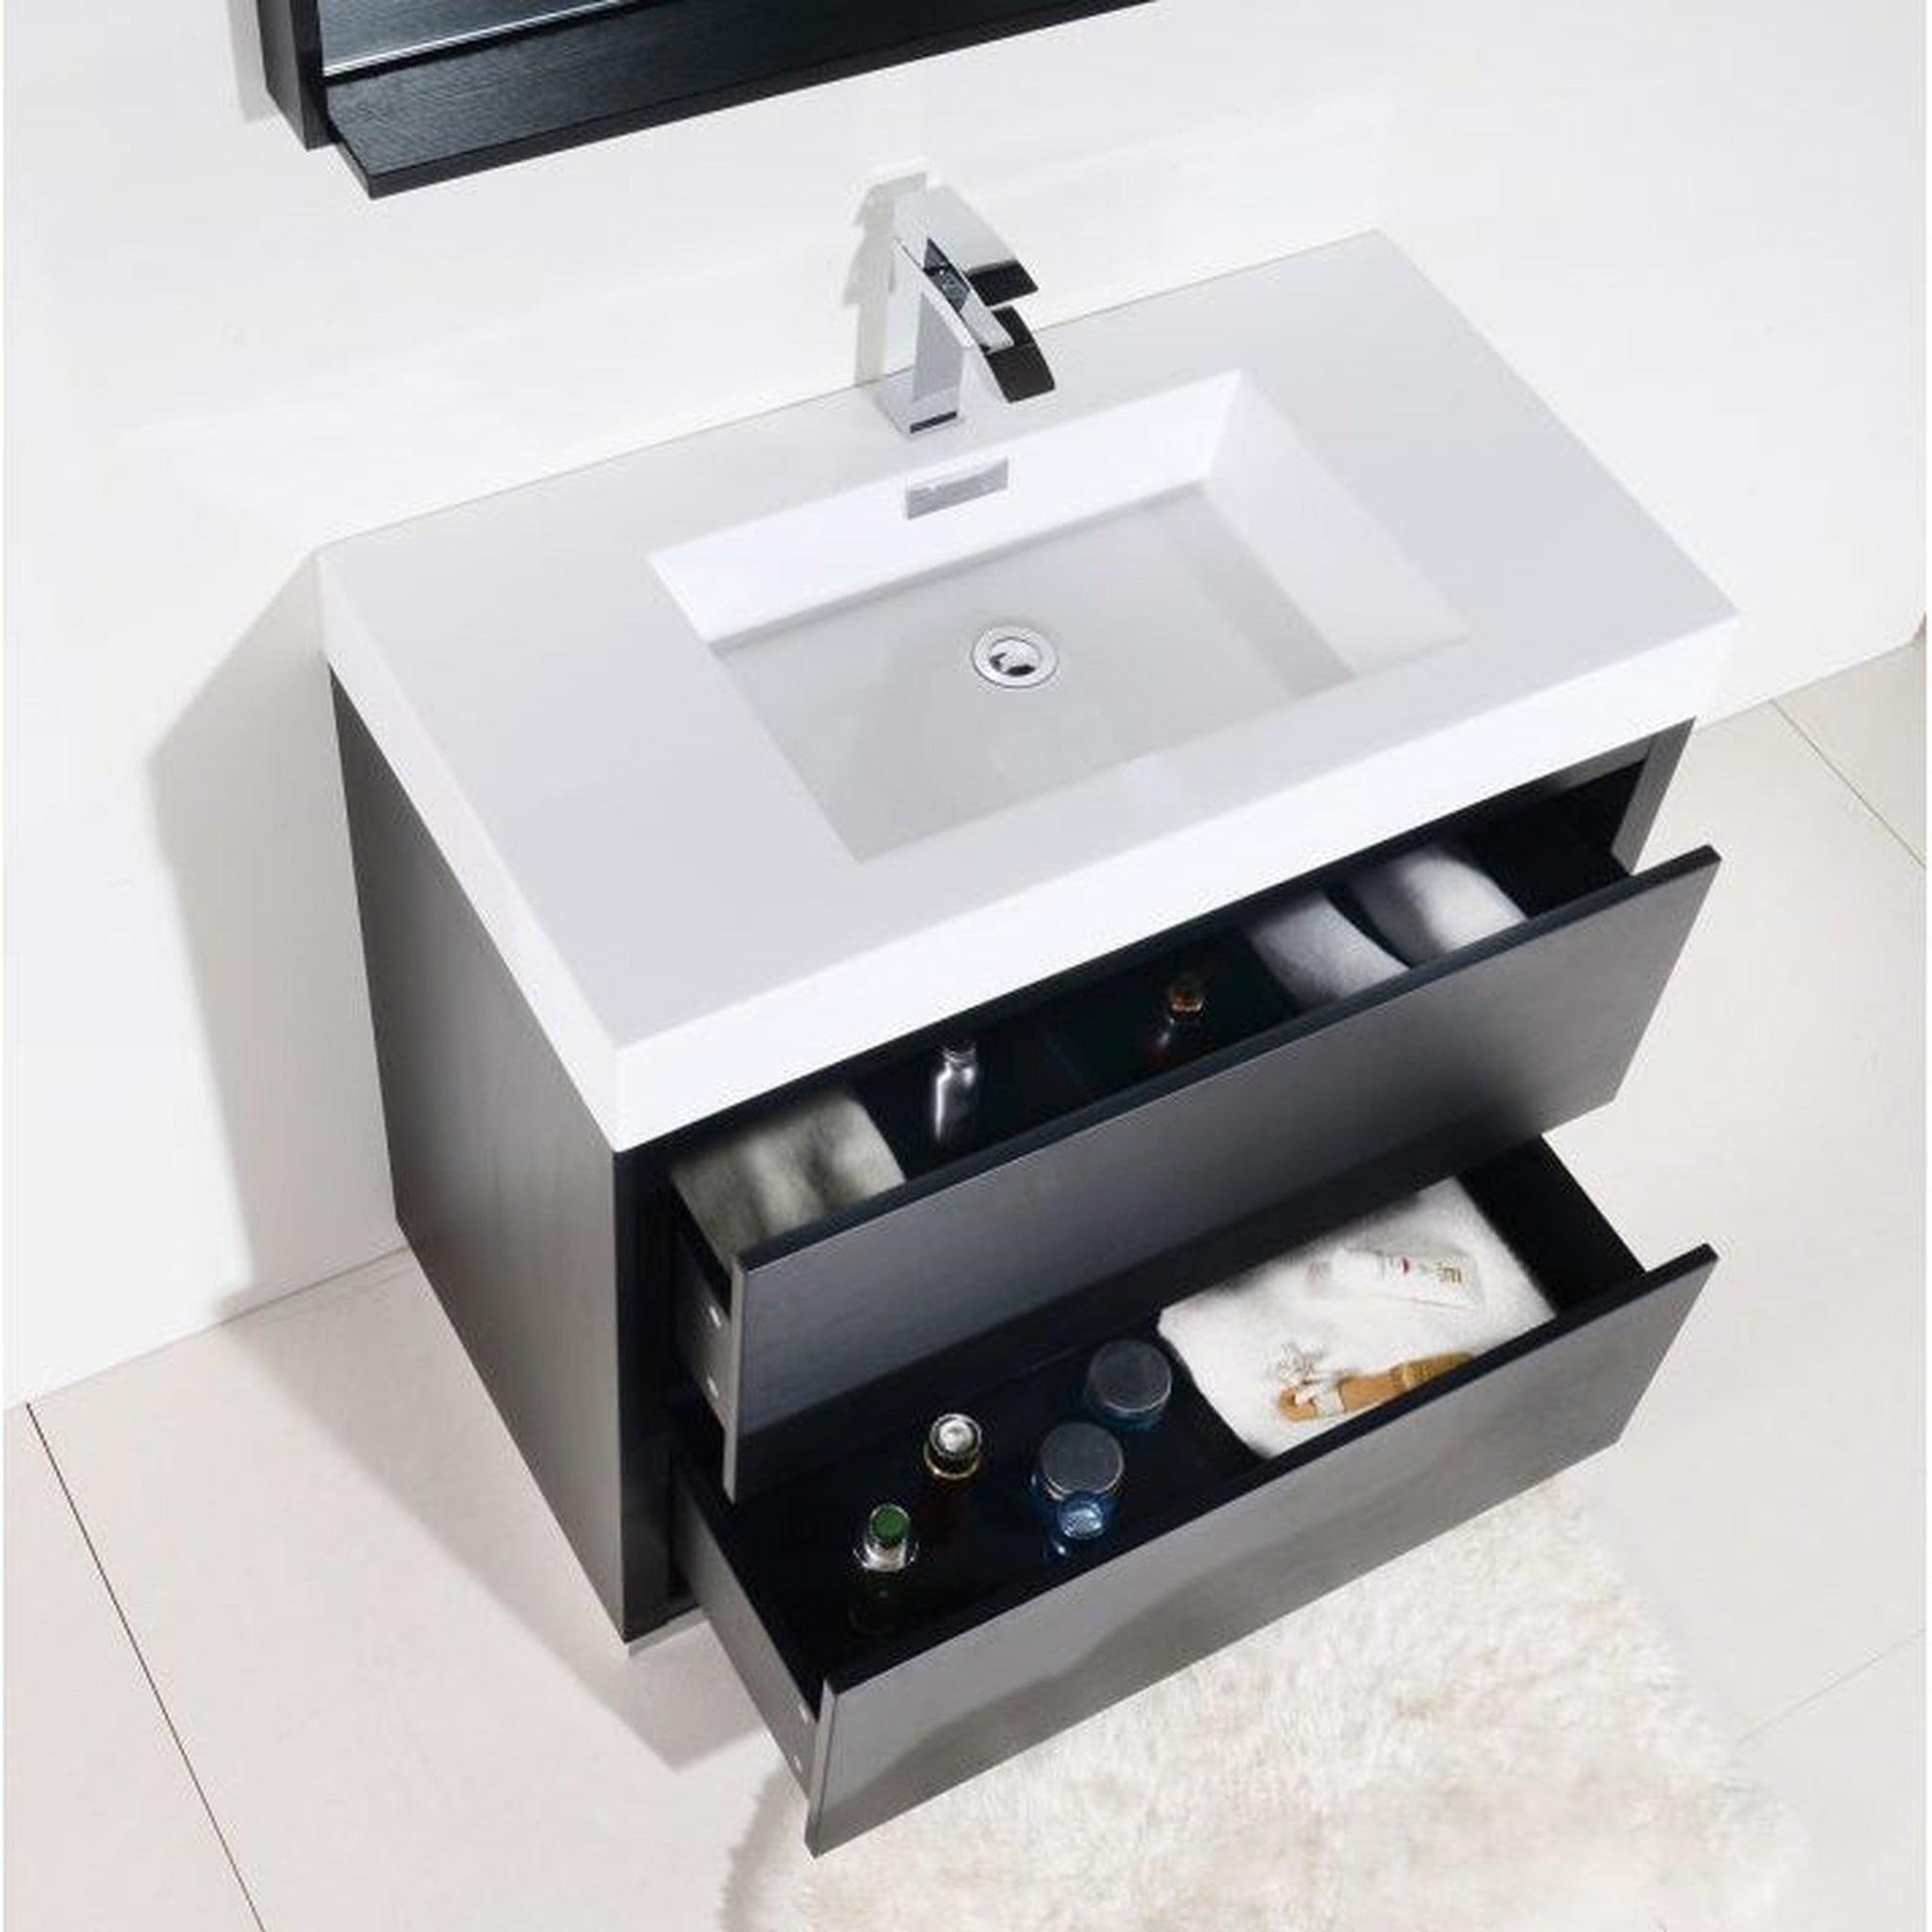 KubeBath Bliss 40" Black Freestanding Modern Bathroom Vanity With Single Integrated Acrylic Sink With Overflow and 38" Black Framed Mirror With Shelf